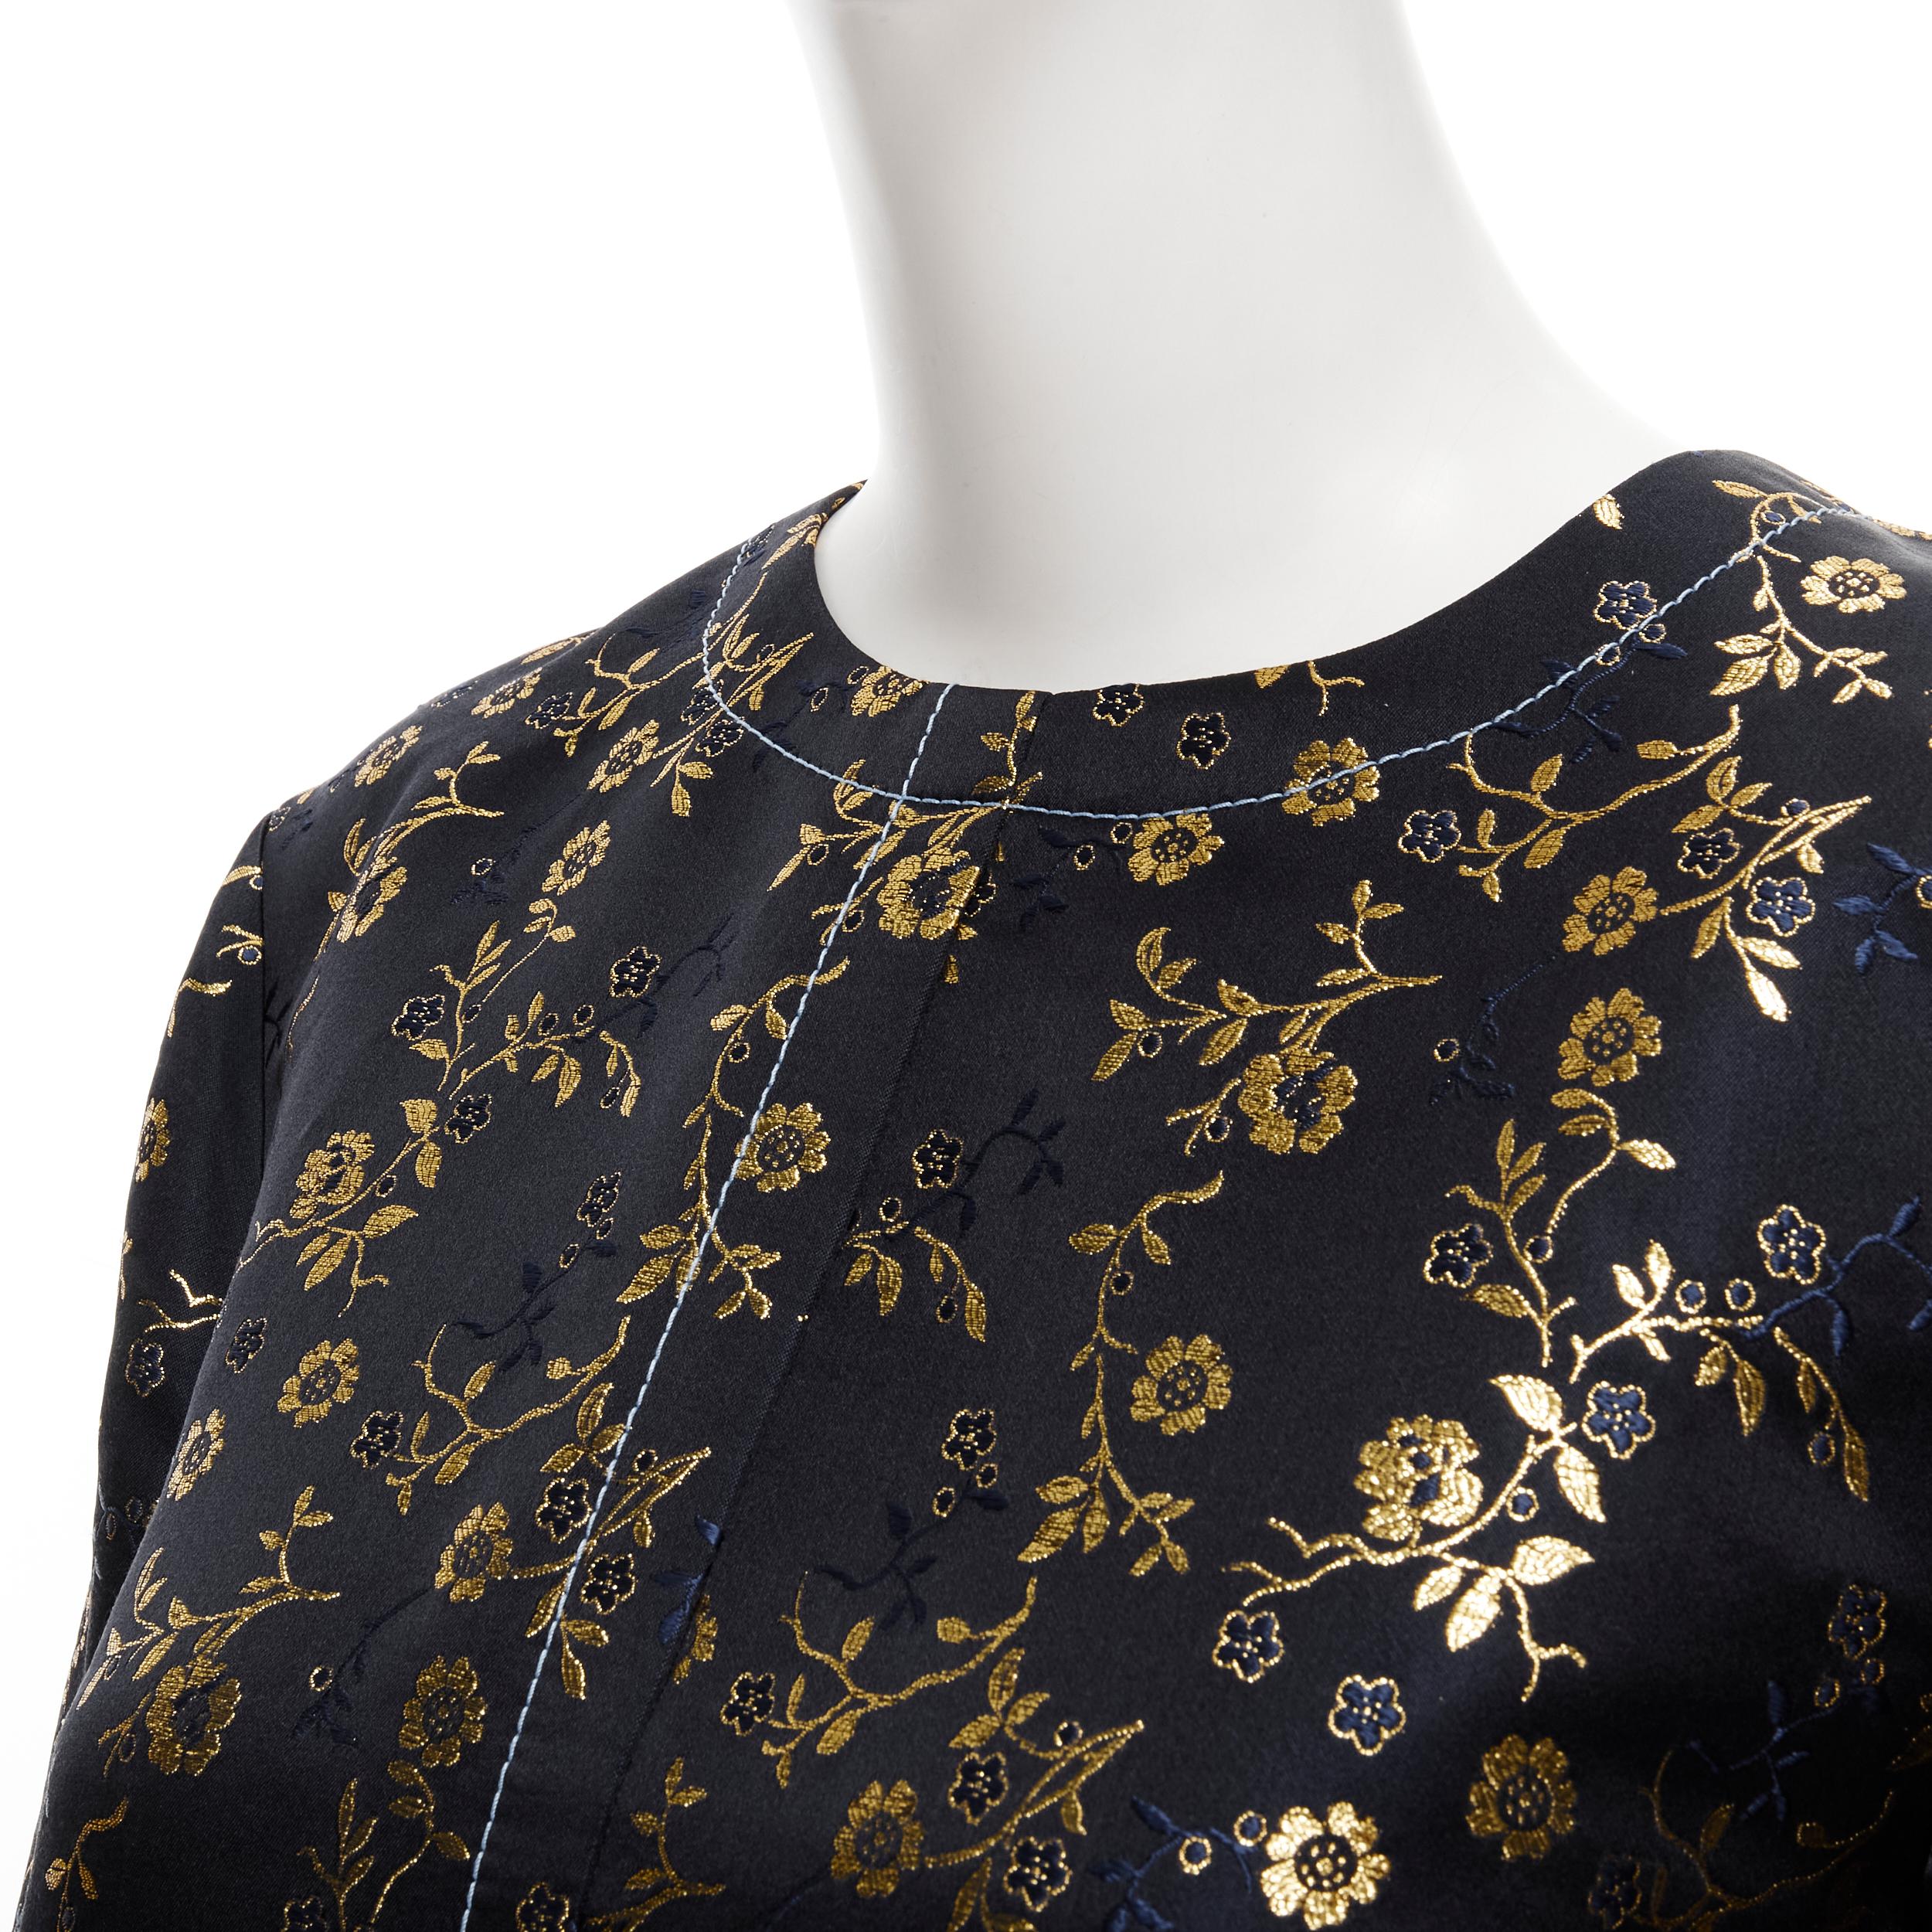 MARNI 2019 black gold blue floral jacquard cuffed sleeve trapeze dress IT40 S 
Reference: CELG/A00177 
Brand: Marni 
Collection: 2019 
Material: Viscose 
Color: Black 
Pattern: Floral 
Closure: Zip 
Extra Detail: Floral jacquard. Light blue